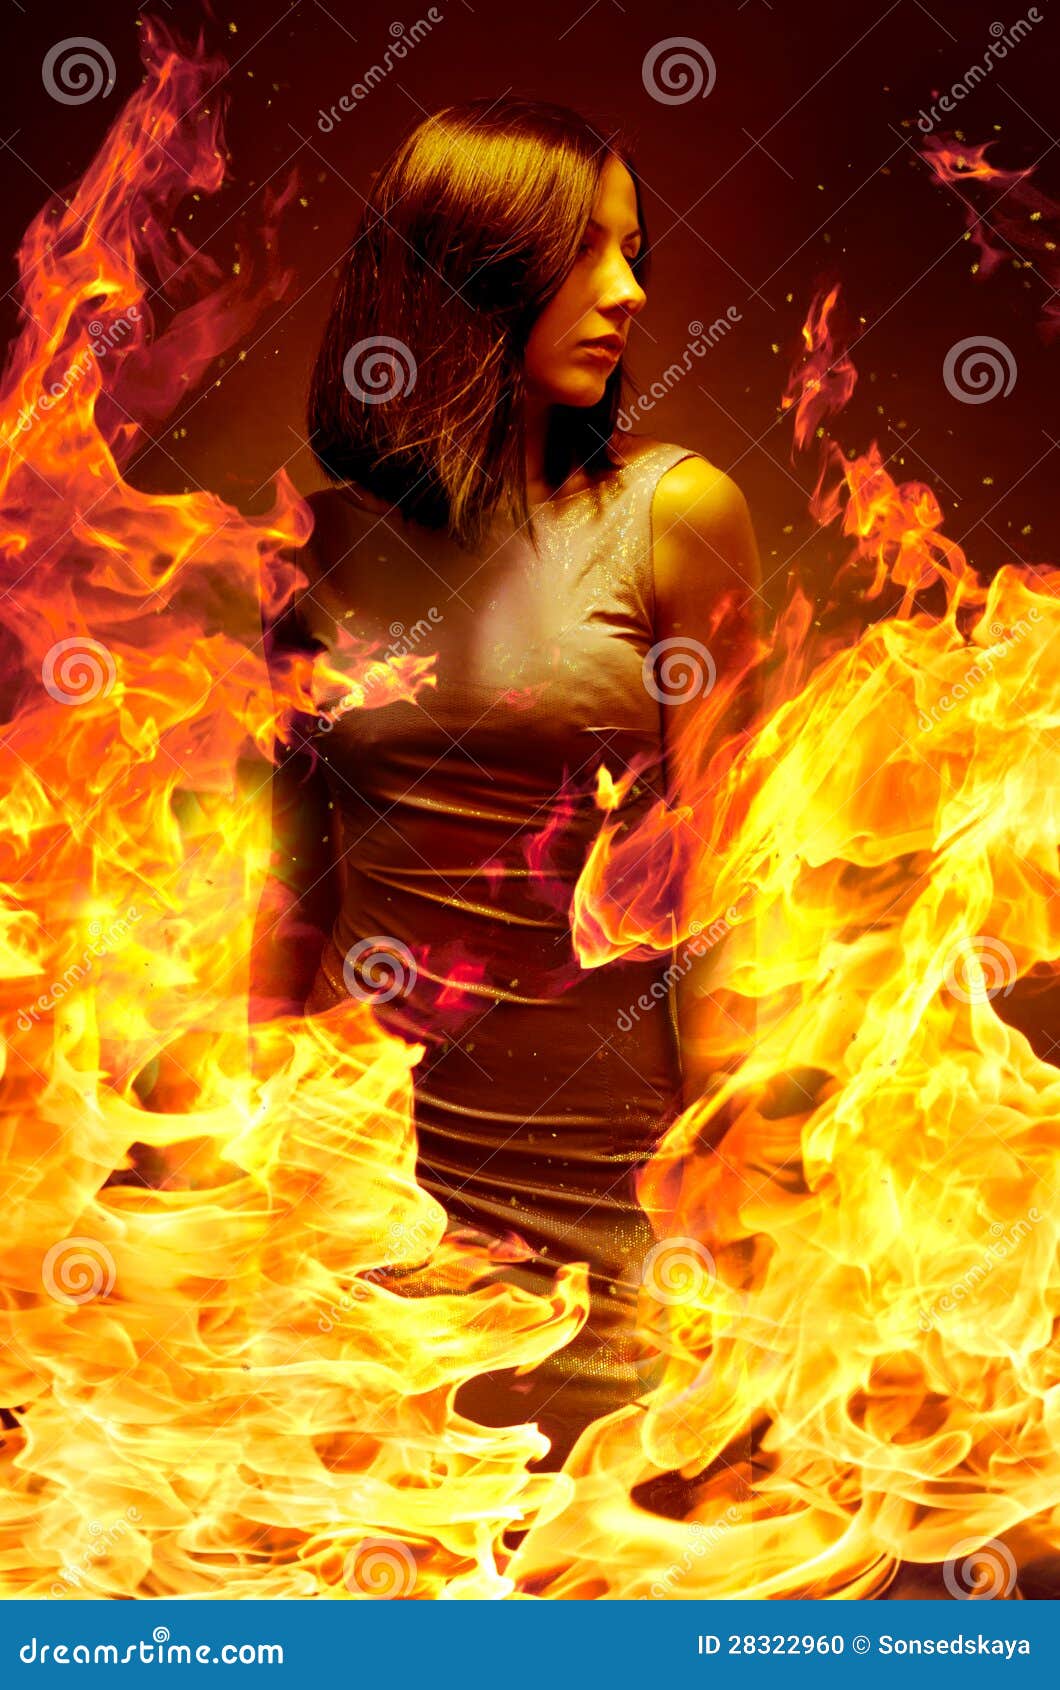 girl is in blazing flame